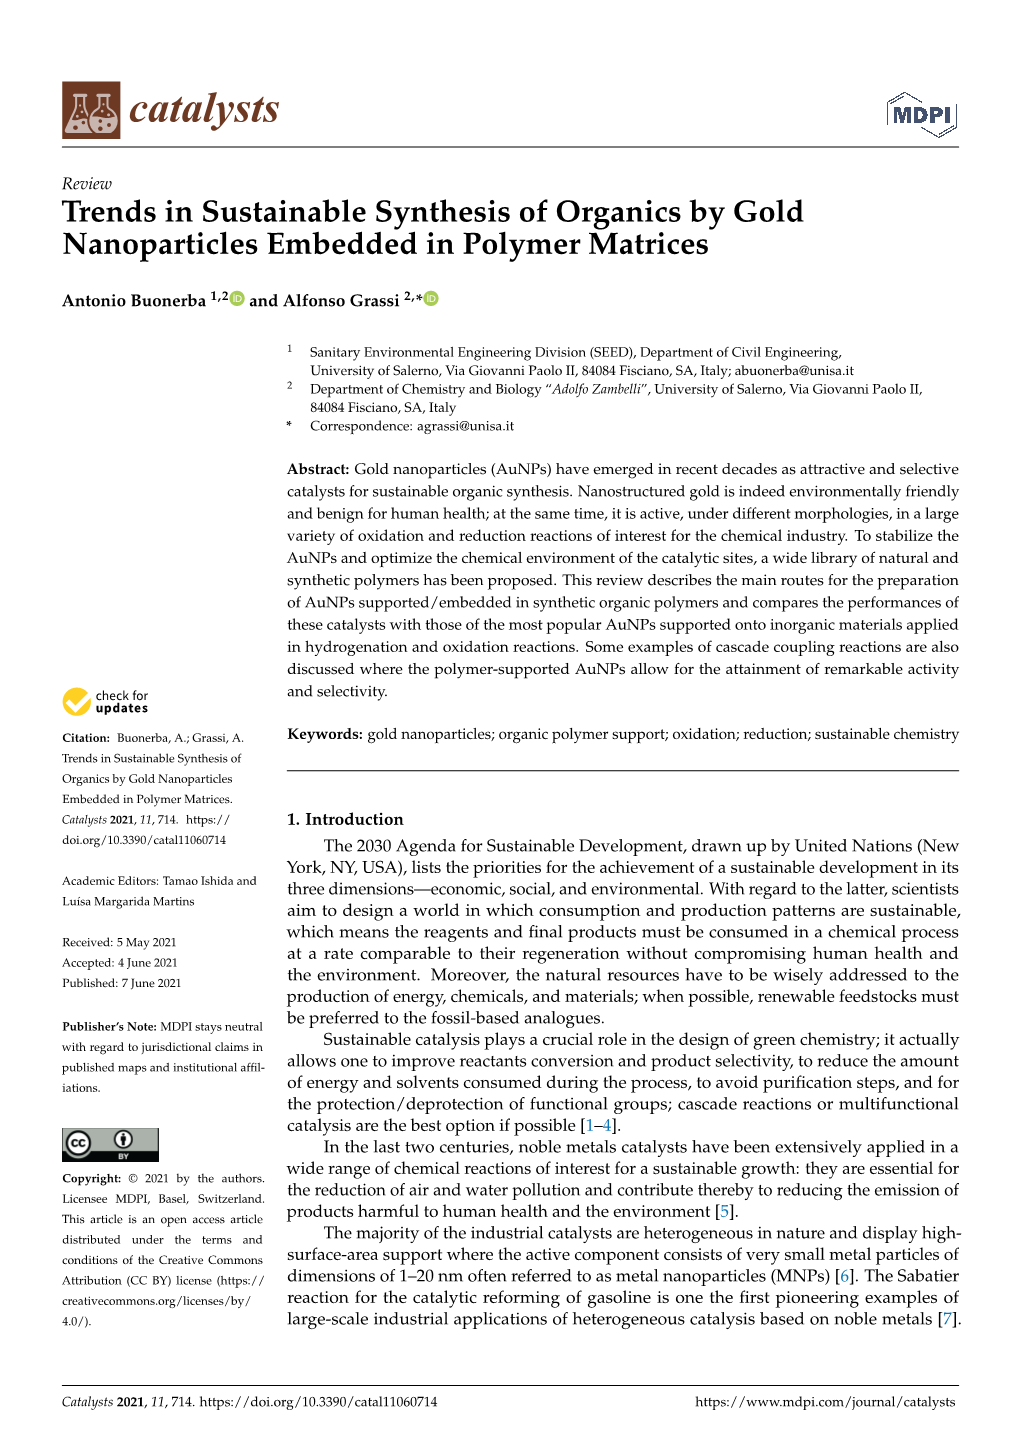 Trends in Sustainable Synthesis of Organics by Gold Nanoparticles Embedded in Polymer Matrices